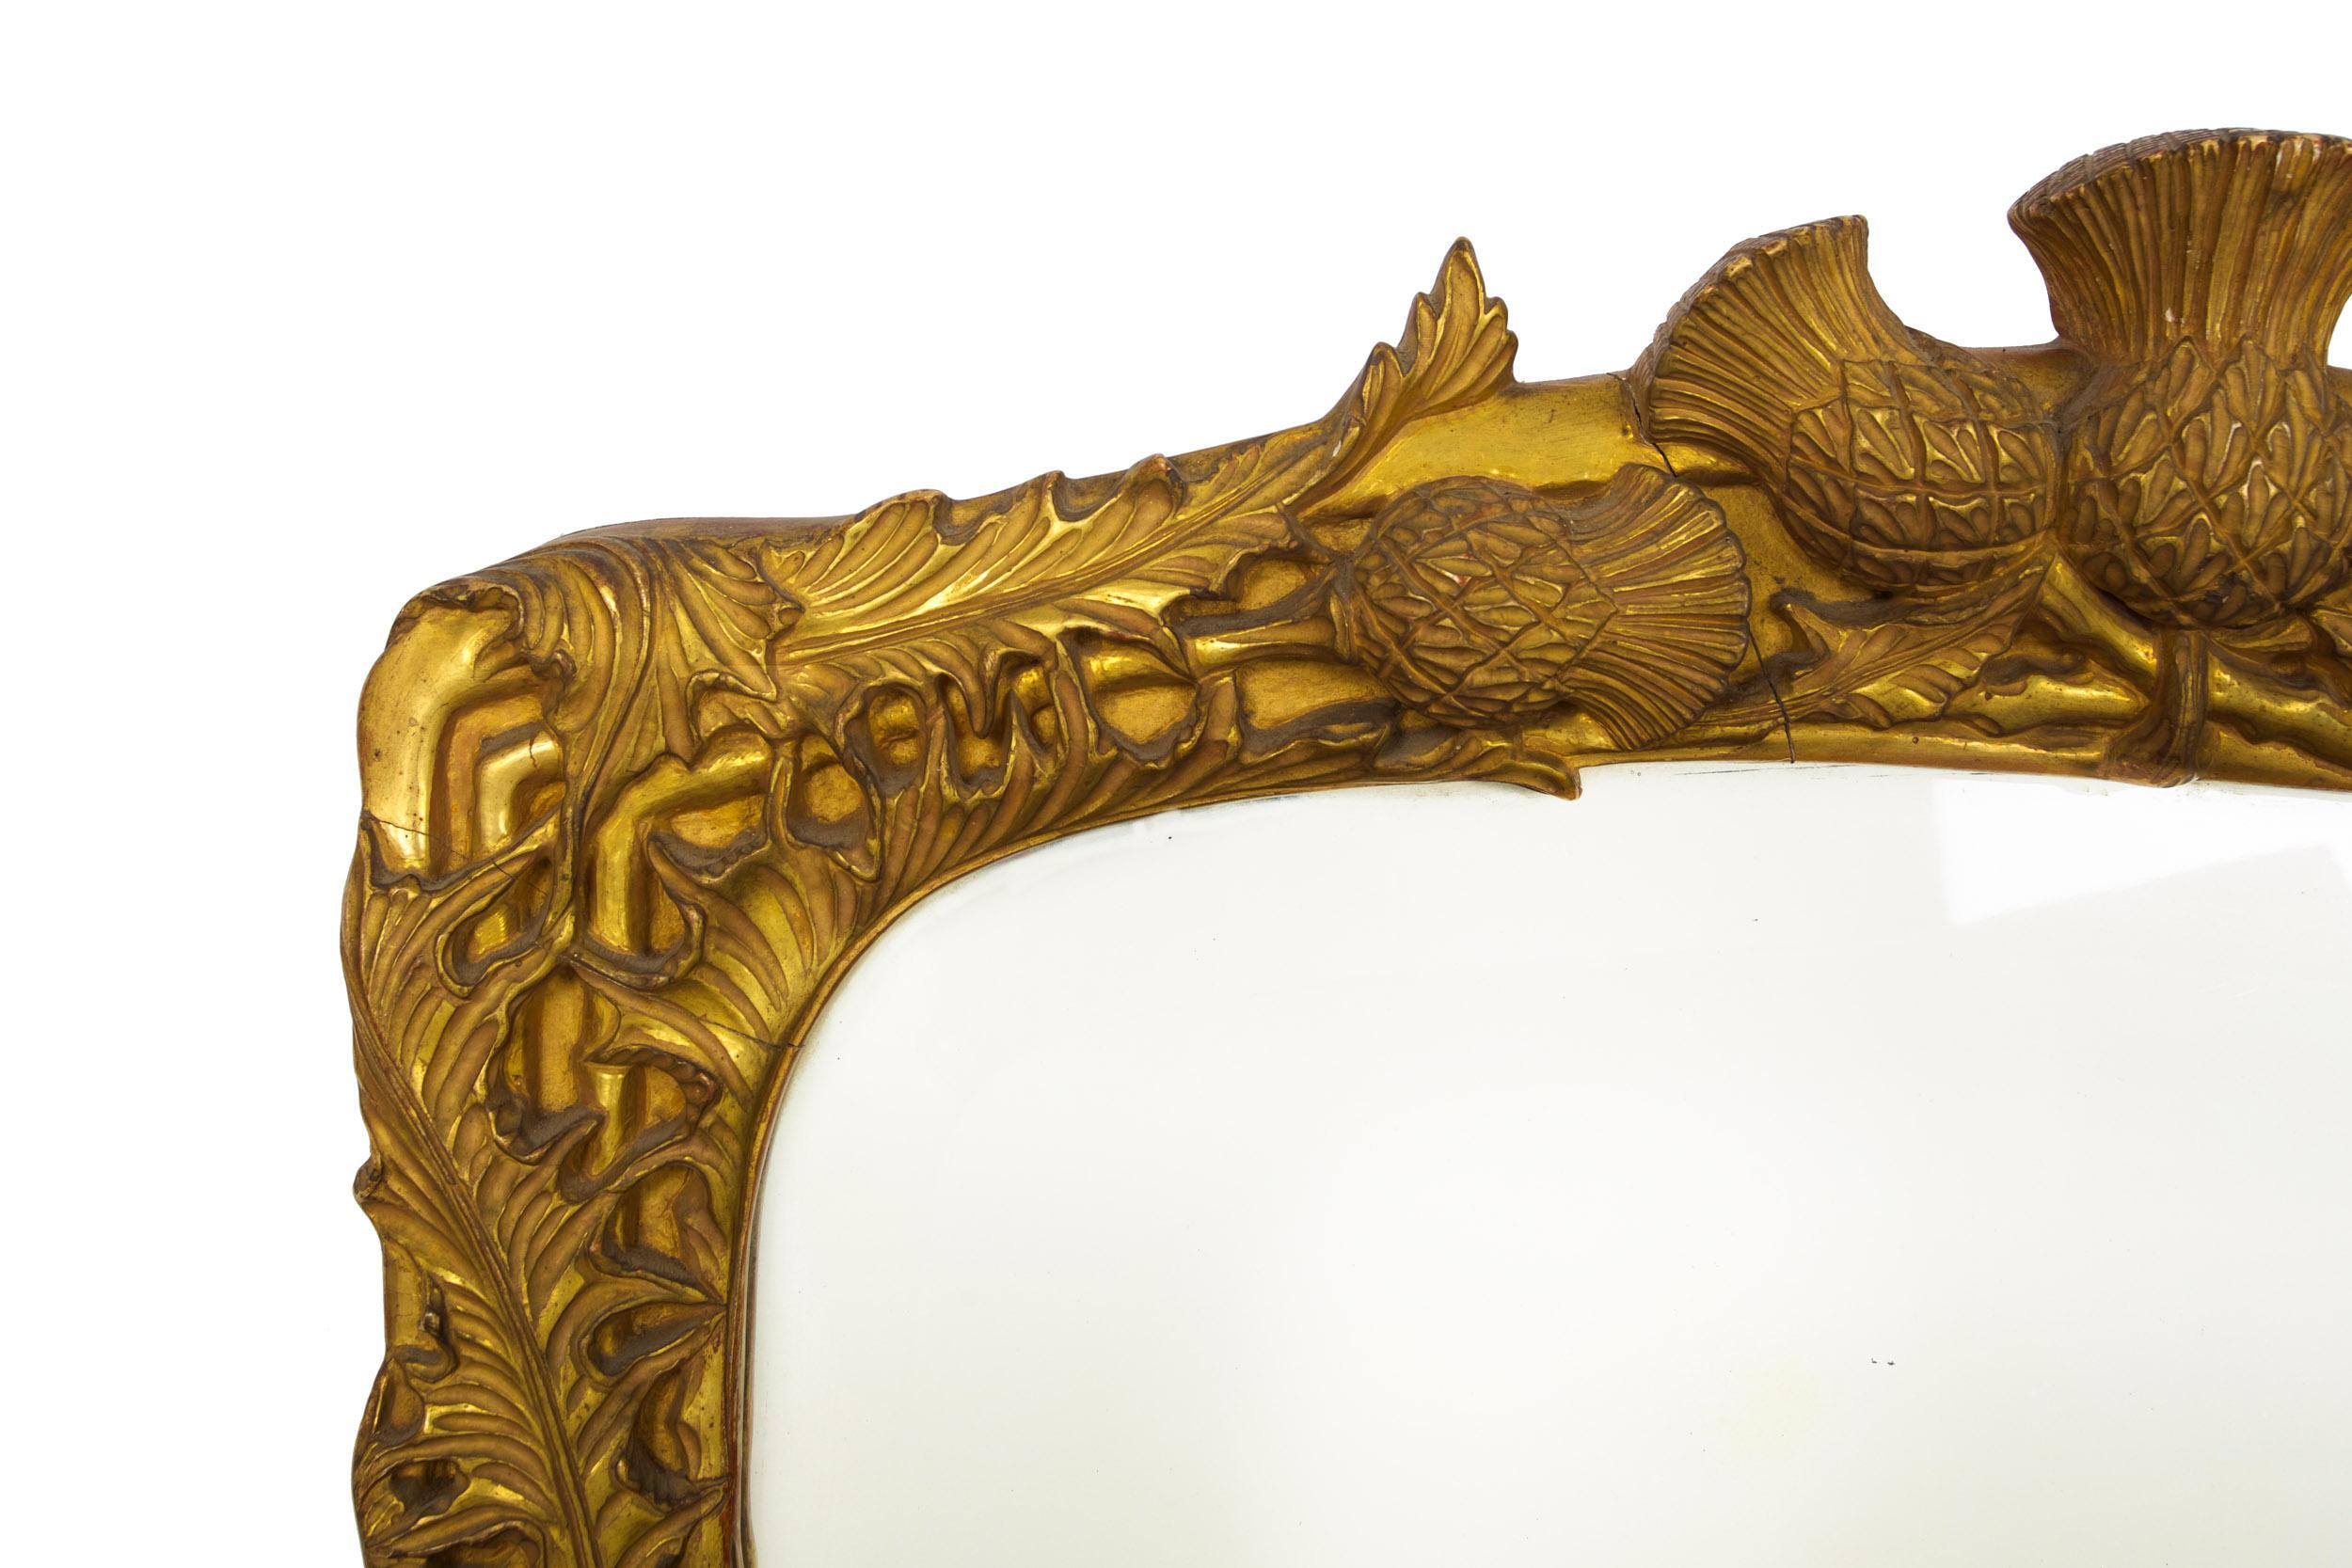 Victorian 19th Century Thistle-Carved Giltwood Mirror, Probably Scottish